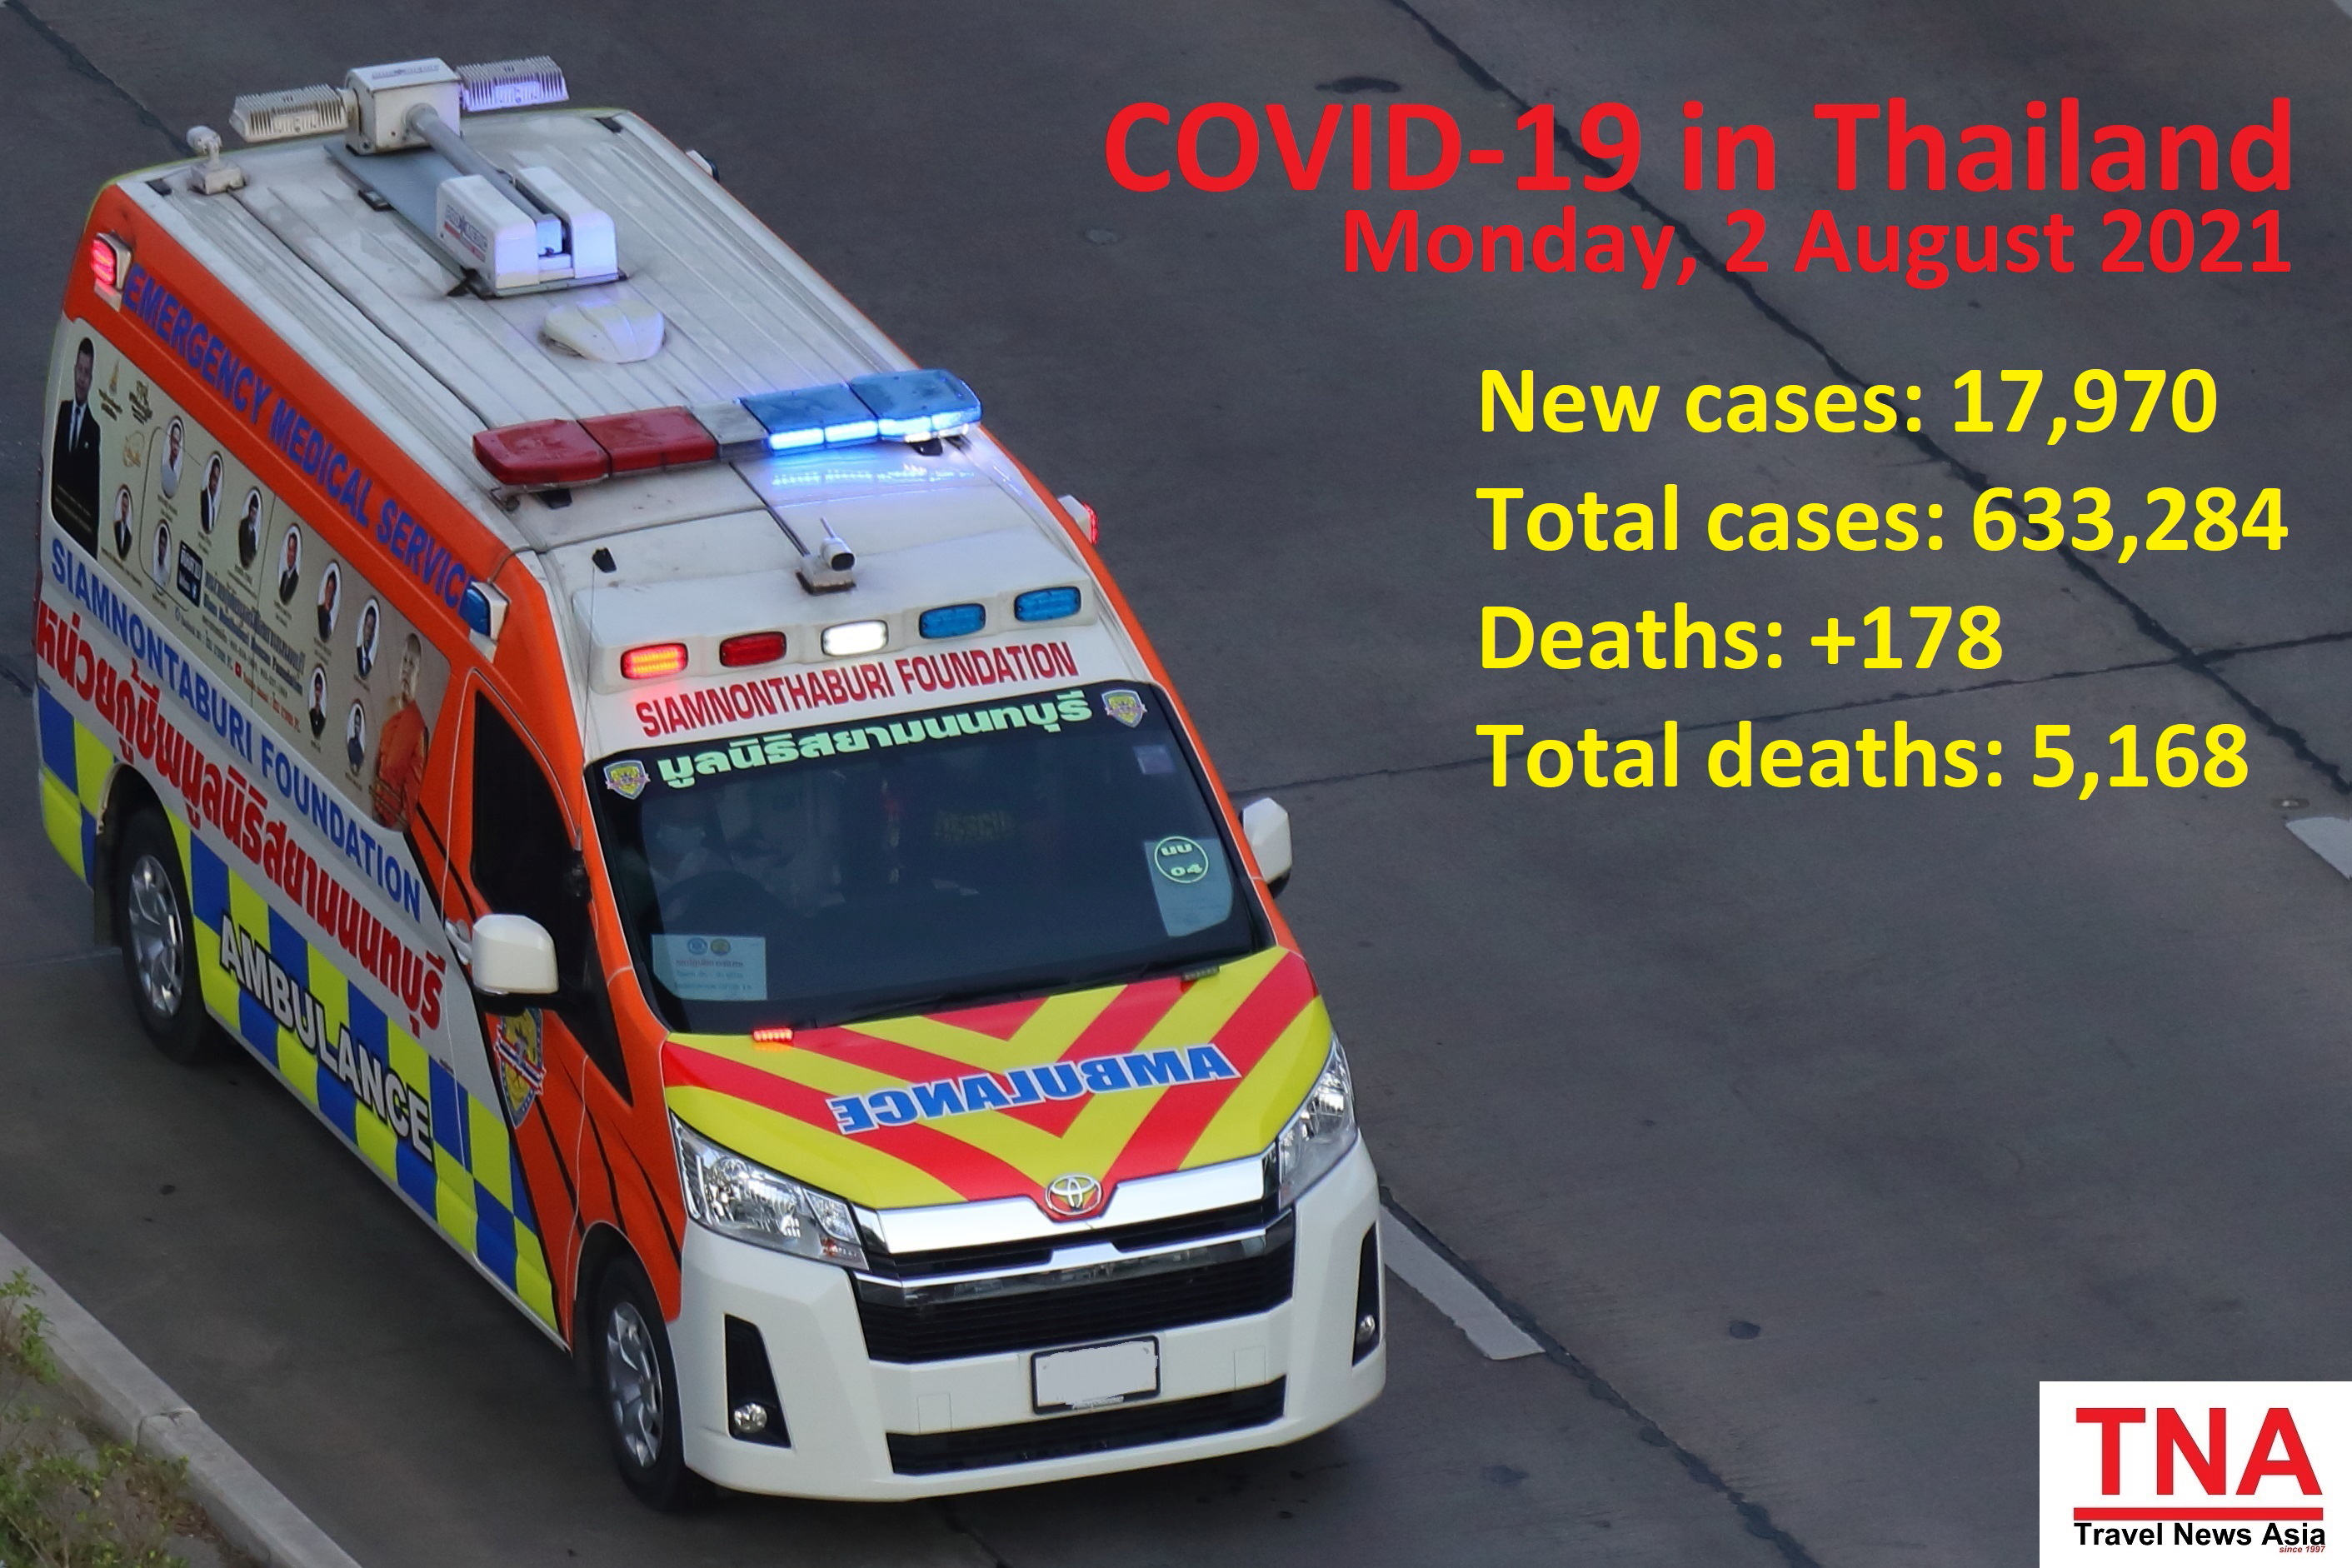 On Monday, 2 August 2021, the Kingdom of Thailand reported 17,970 new cases and 178 more deaths, bringing the overall total to 633,284 and 5,168, respectively. Picture by Steven Howard of TravelNewsAsia.com Click to enlarge.